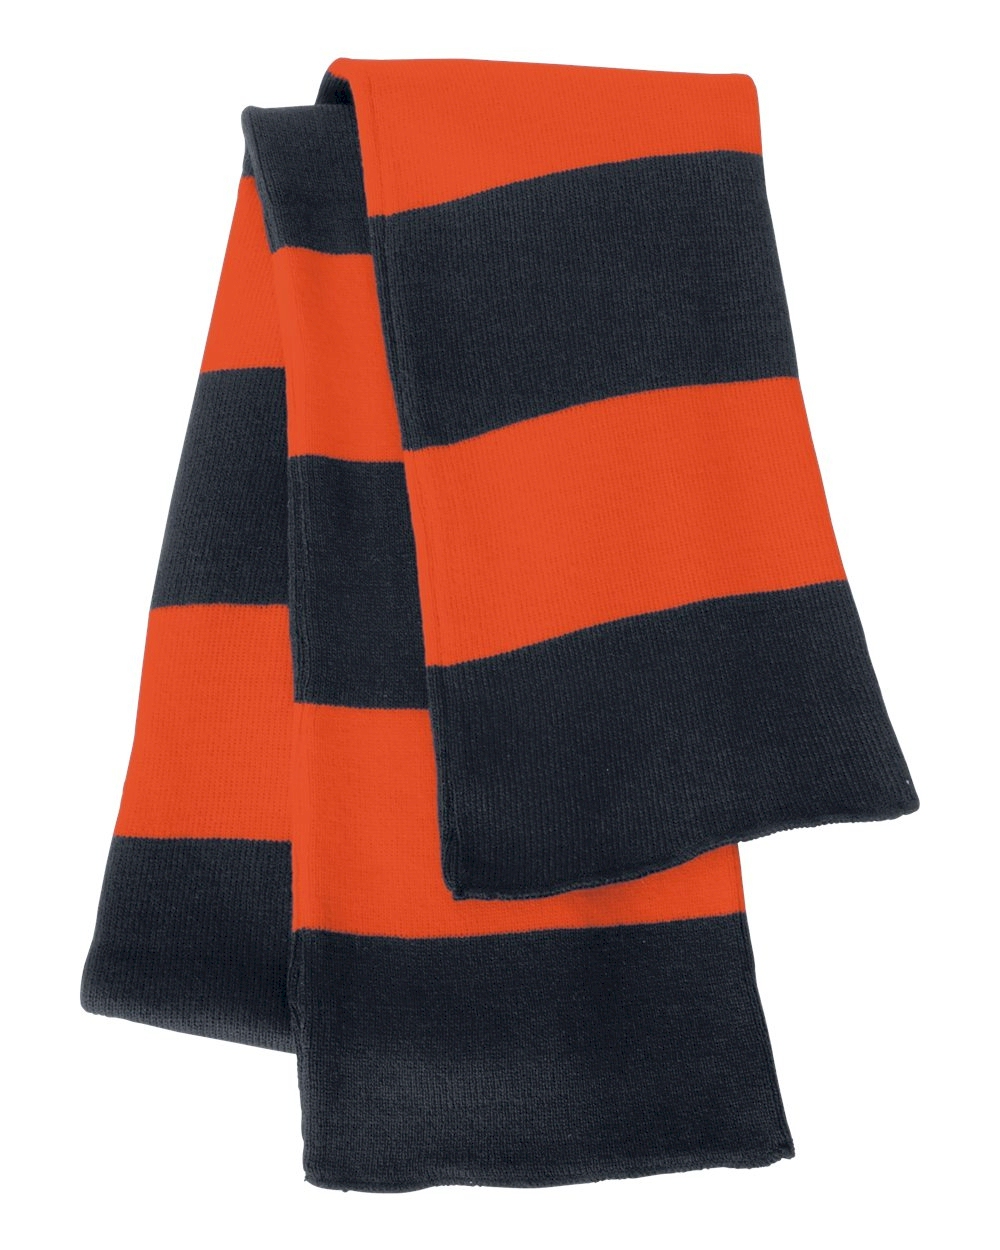 Rugby Striped Knit Scarf Embroidery Blanks - NAVY/ORANGE